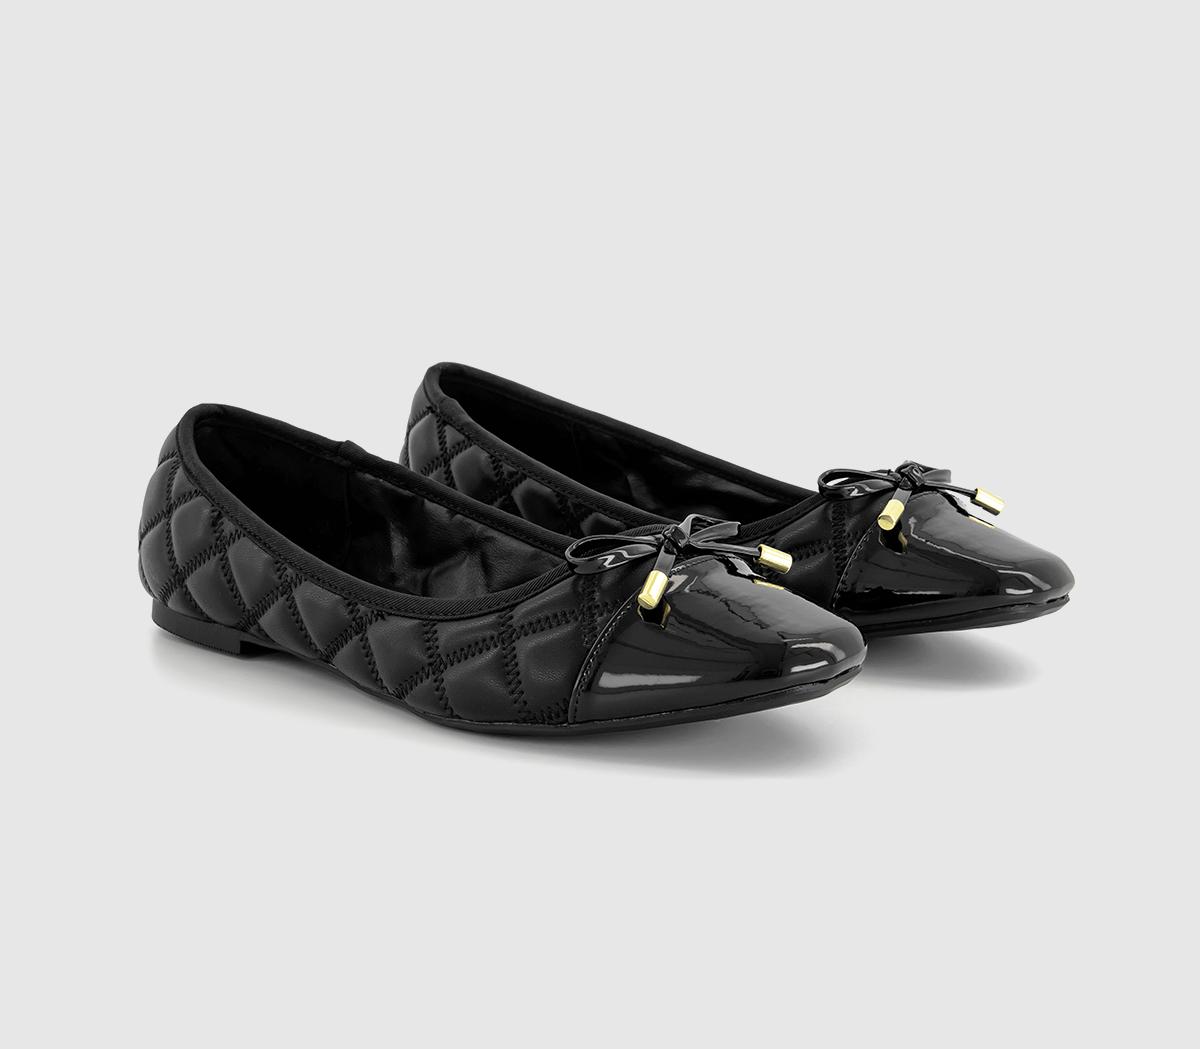 OFFICE Womens Foreveryoung Quilted Toe Cap Bow Ballerina Shoes Black, 8